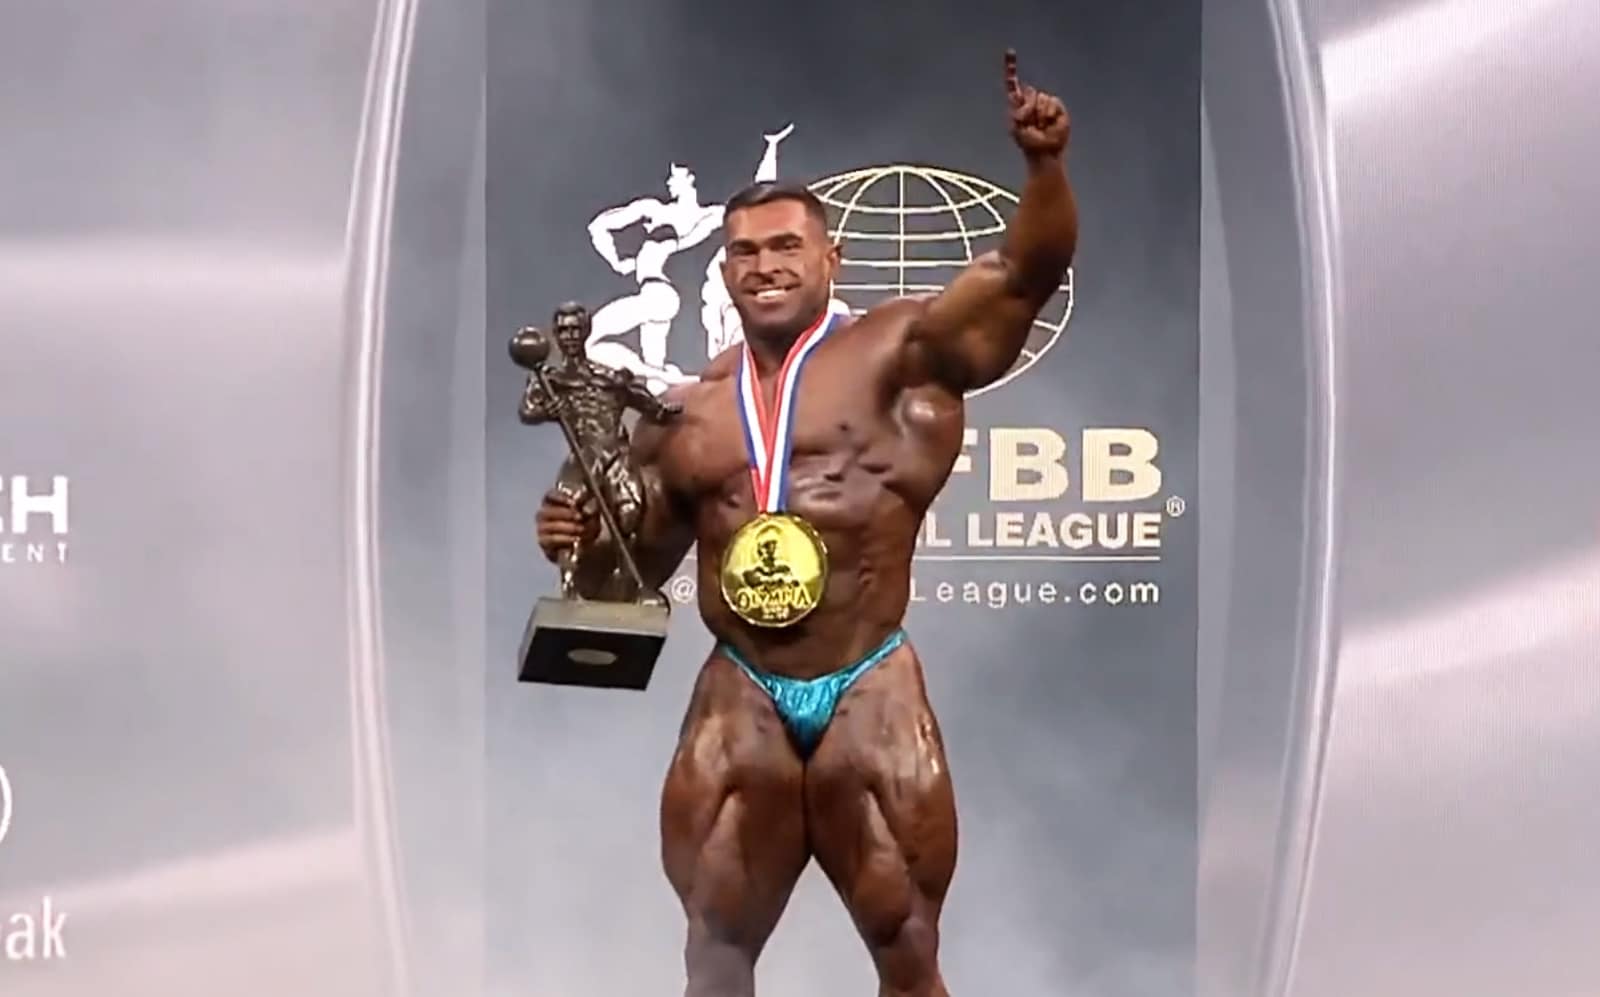 Mr. Olympia 2023: When is it, what time does it start, and where